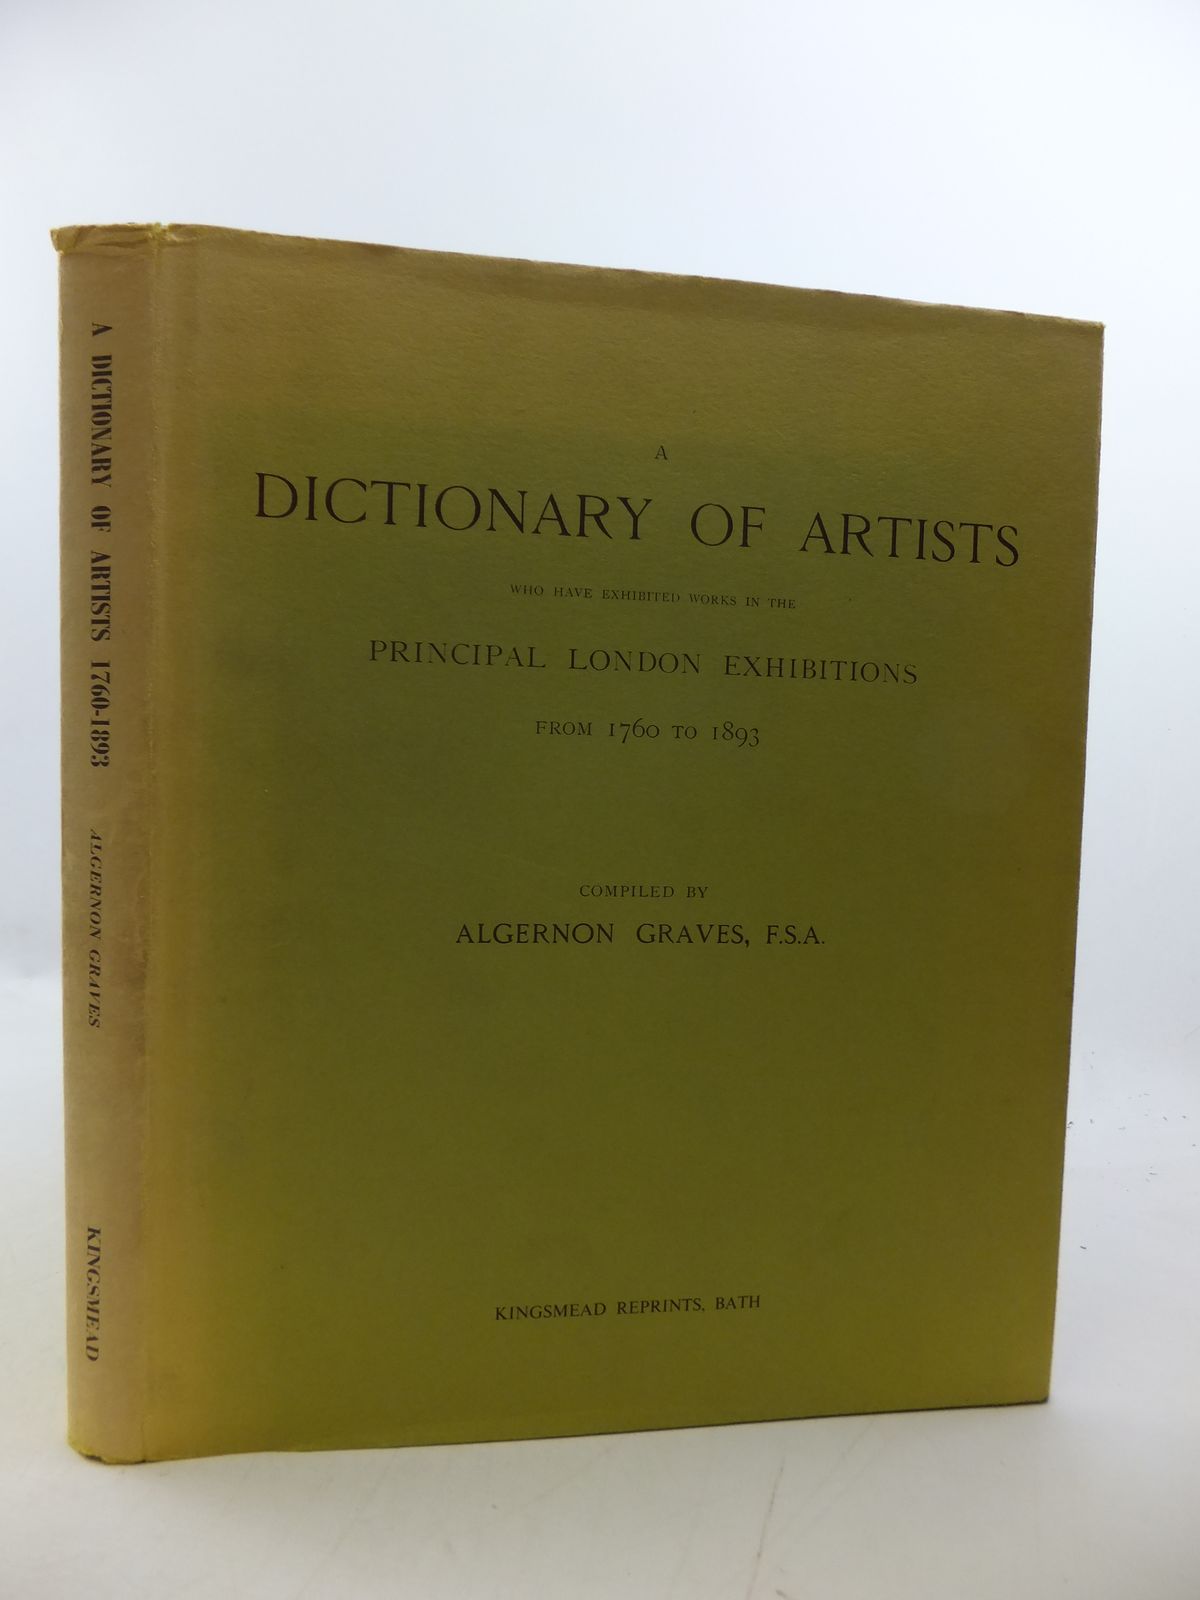 Photo of A DICTIONARY OF ARTISTS WHO HAVE EXHIBITED WORKS IN THE PRINCIPAL LONDON EXHIBITIONS FROM 1760 TO 1893 written by Graves, Algernon published by Kingsmead Reprints (STOCK CODE: 1808495)  for sale by Stella & Rose's Books